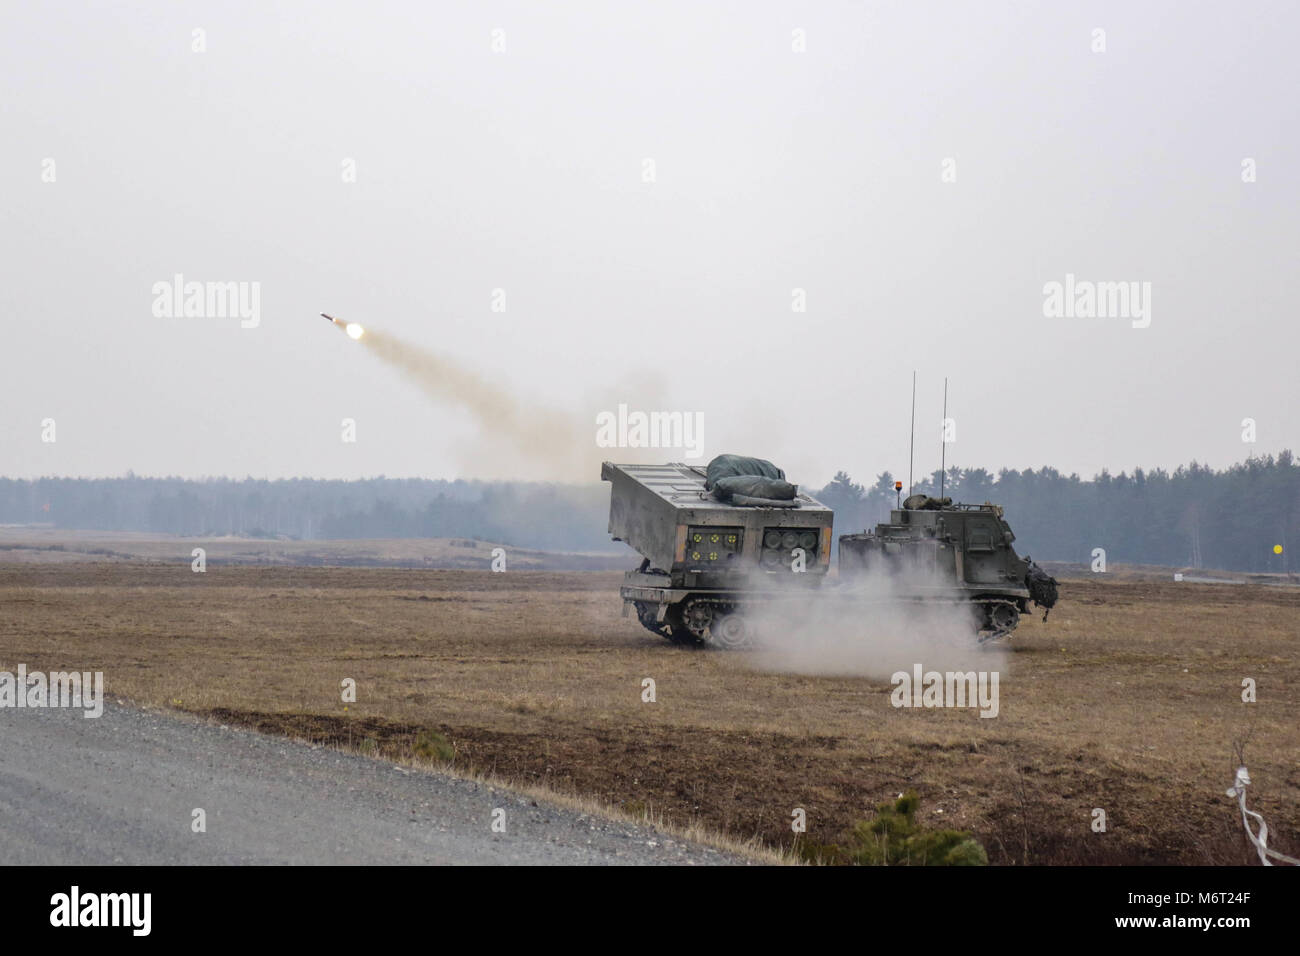 British soldiers of the 19th Regiment Royal Artillery fire a Multiple Launch Rocket System and High Mobility Artillery Rocket System (MLRS) during Exercise Dynamic Front 18 at the 7th Army Training Command in Grafenwoehr, Germany, March 5, 2018. Exercise Dynamic Front 18 includes approximately 3,700 participants from 26 nations at the U.S. Army’s Grafenwoehr Training Area (Germany), Feb. 23-March 10, 2018. Dynamic Front is an annual U.S. Army Europe (USAREUR) exercise focused on the interoperability of U.S. Army, joint service and allied nation artillery and fire support in a multinational env Stock Photo